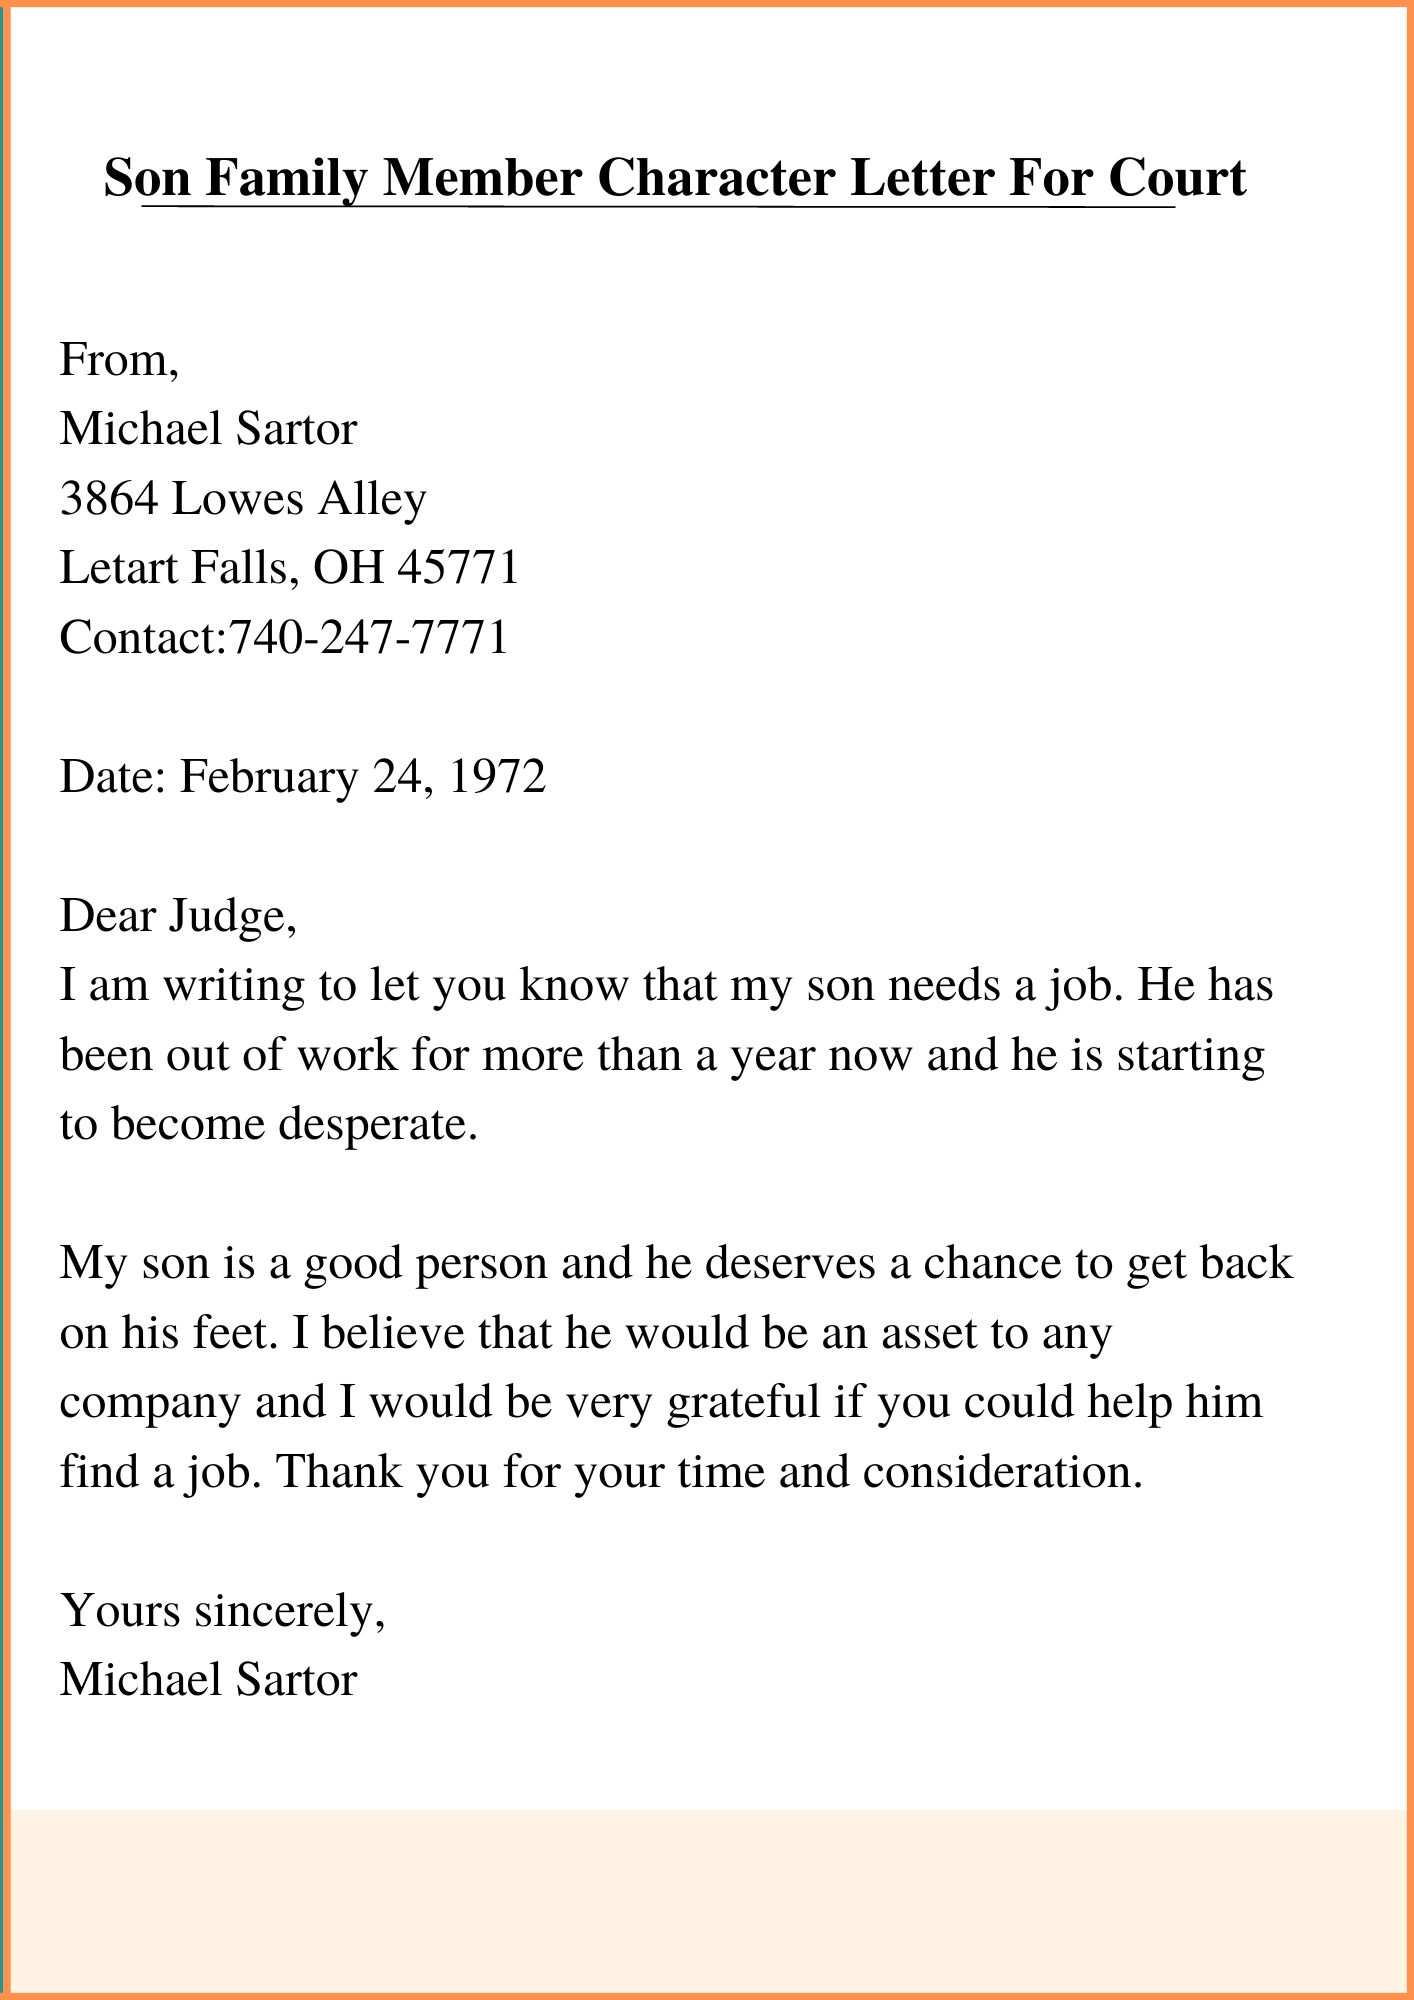 Character Reference Letter For Son To Judge 